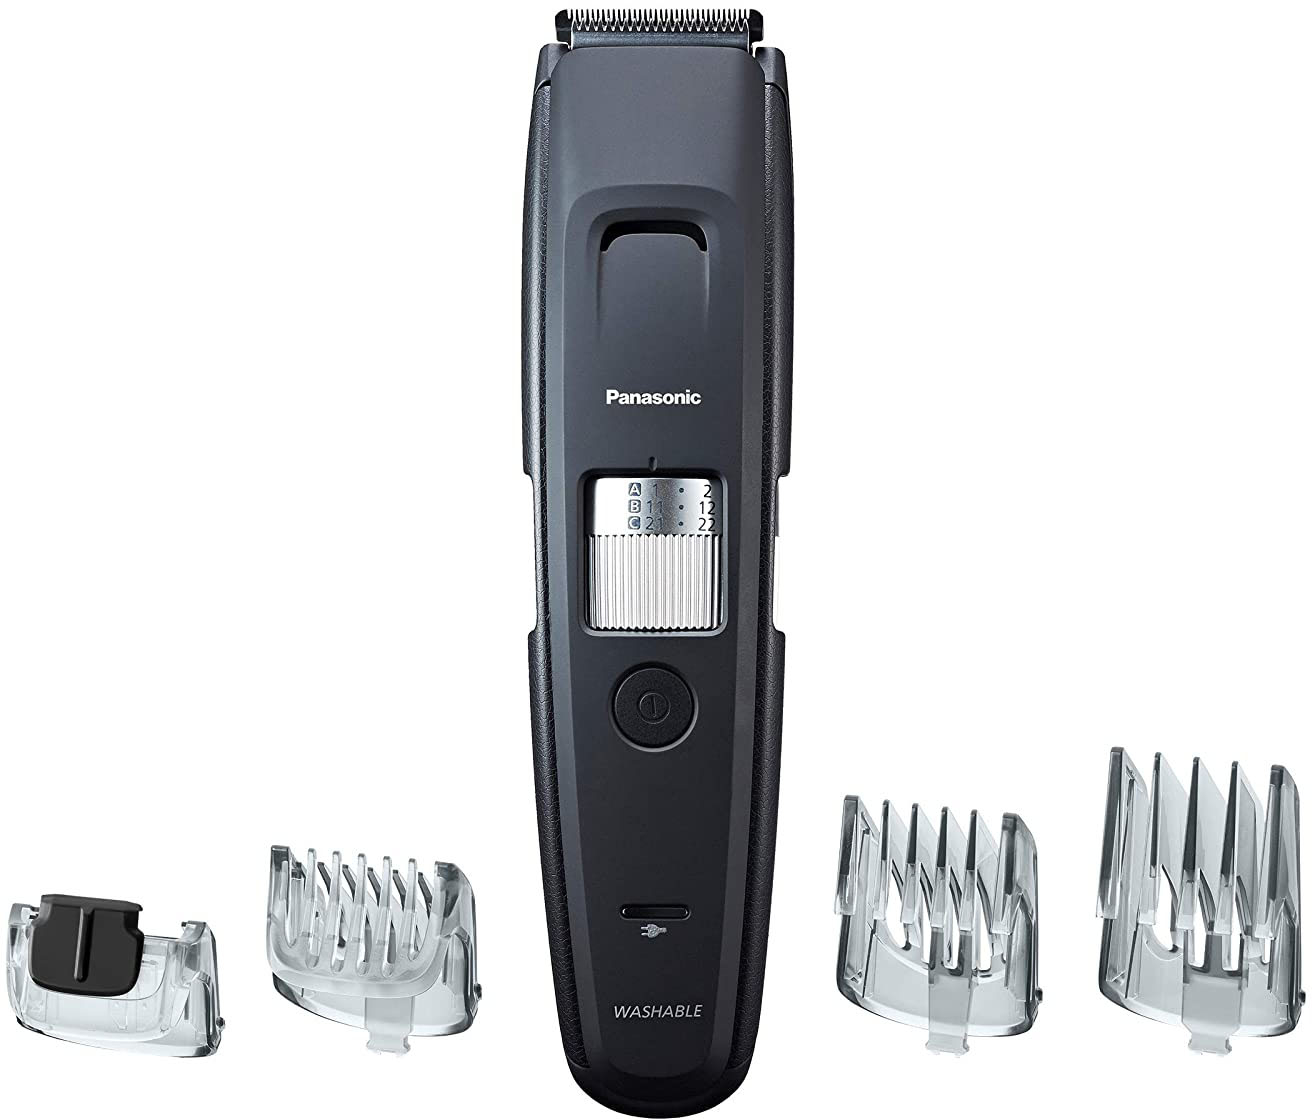 Panasonic 4 Beard Wet/Dry ER-GB96-K Buy: Best with Attachments Black Trimmer ER-GB96-K Rechargeable